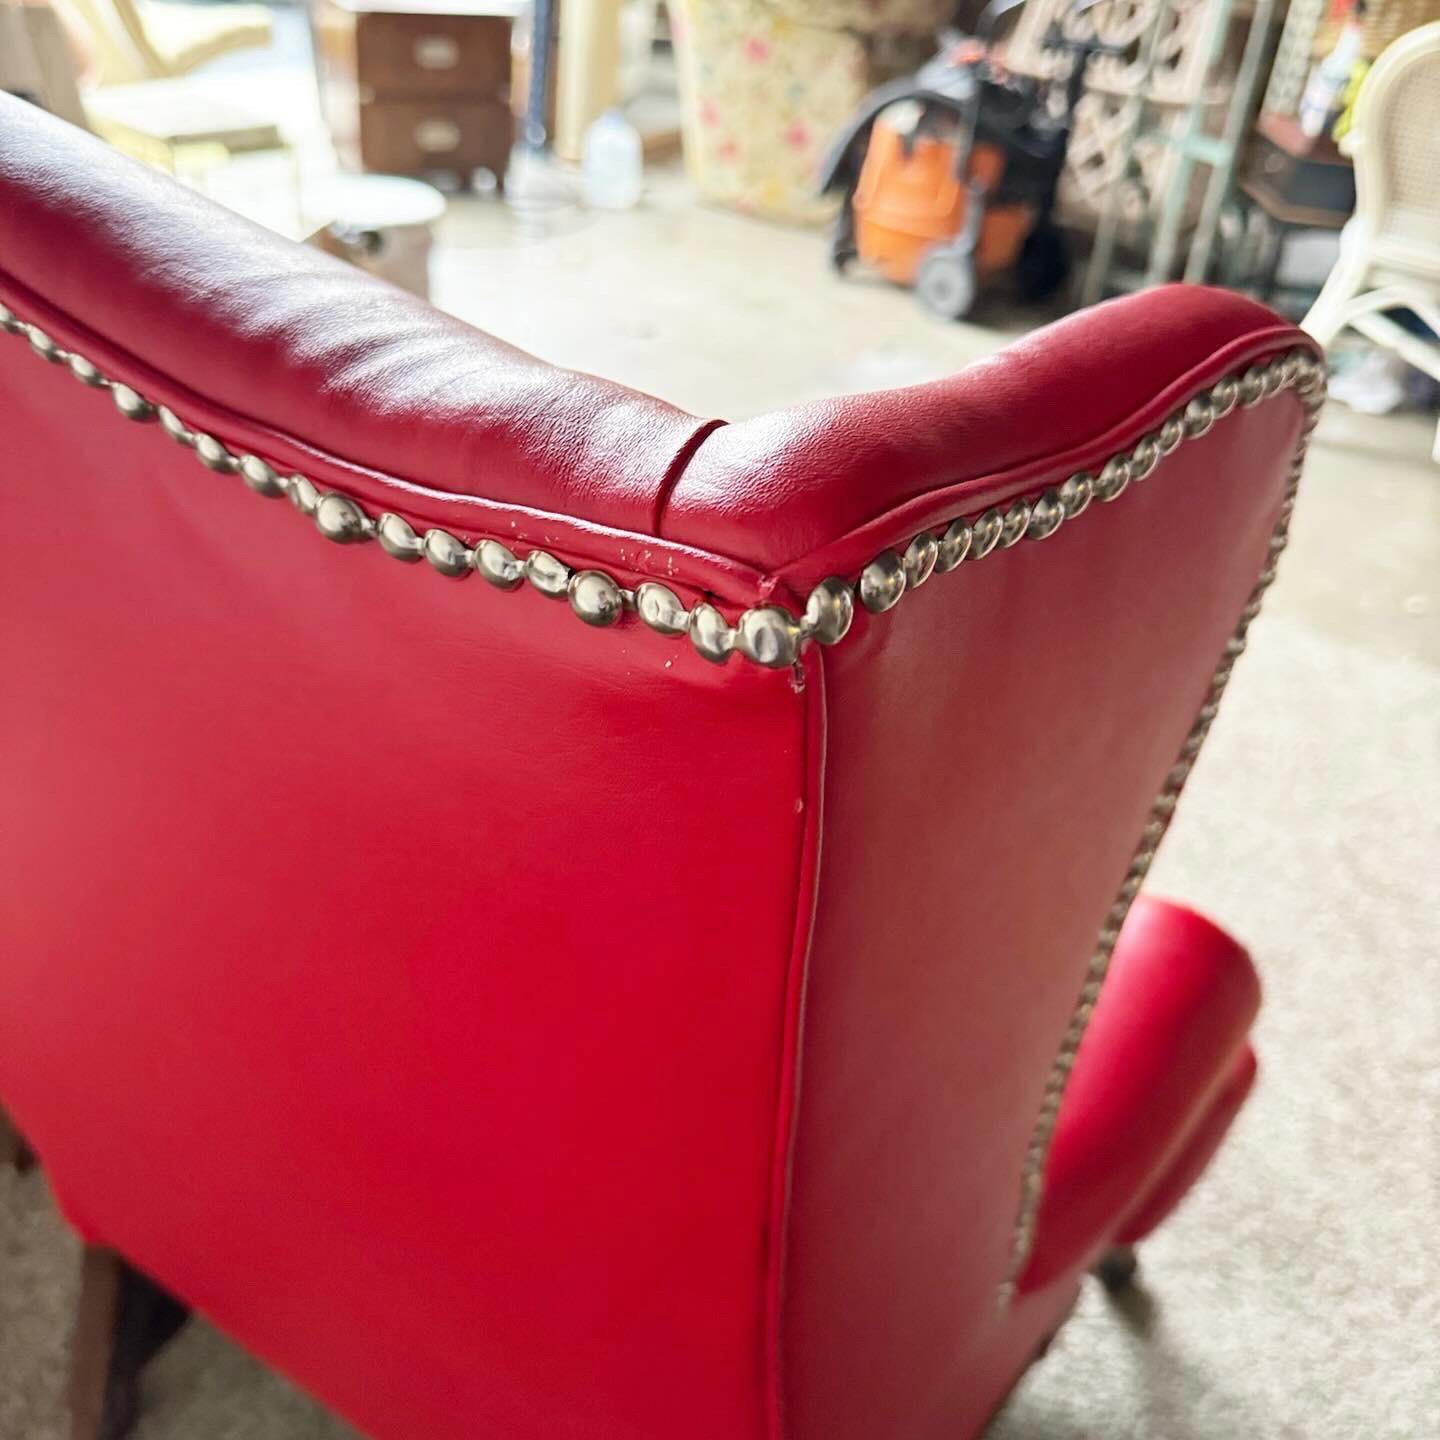 American Traditional Red Faux Leather Wingback Chairs - a Pair For Sale